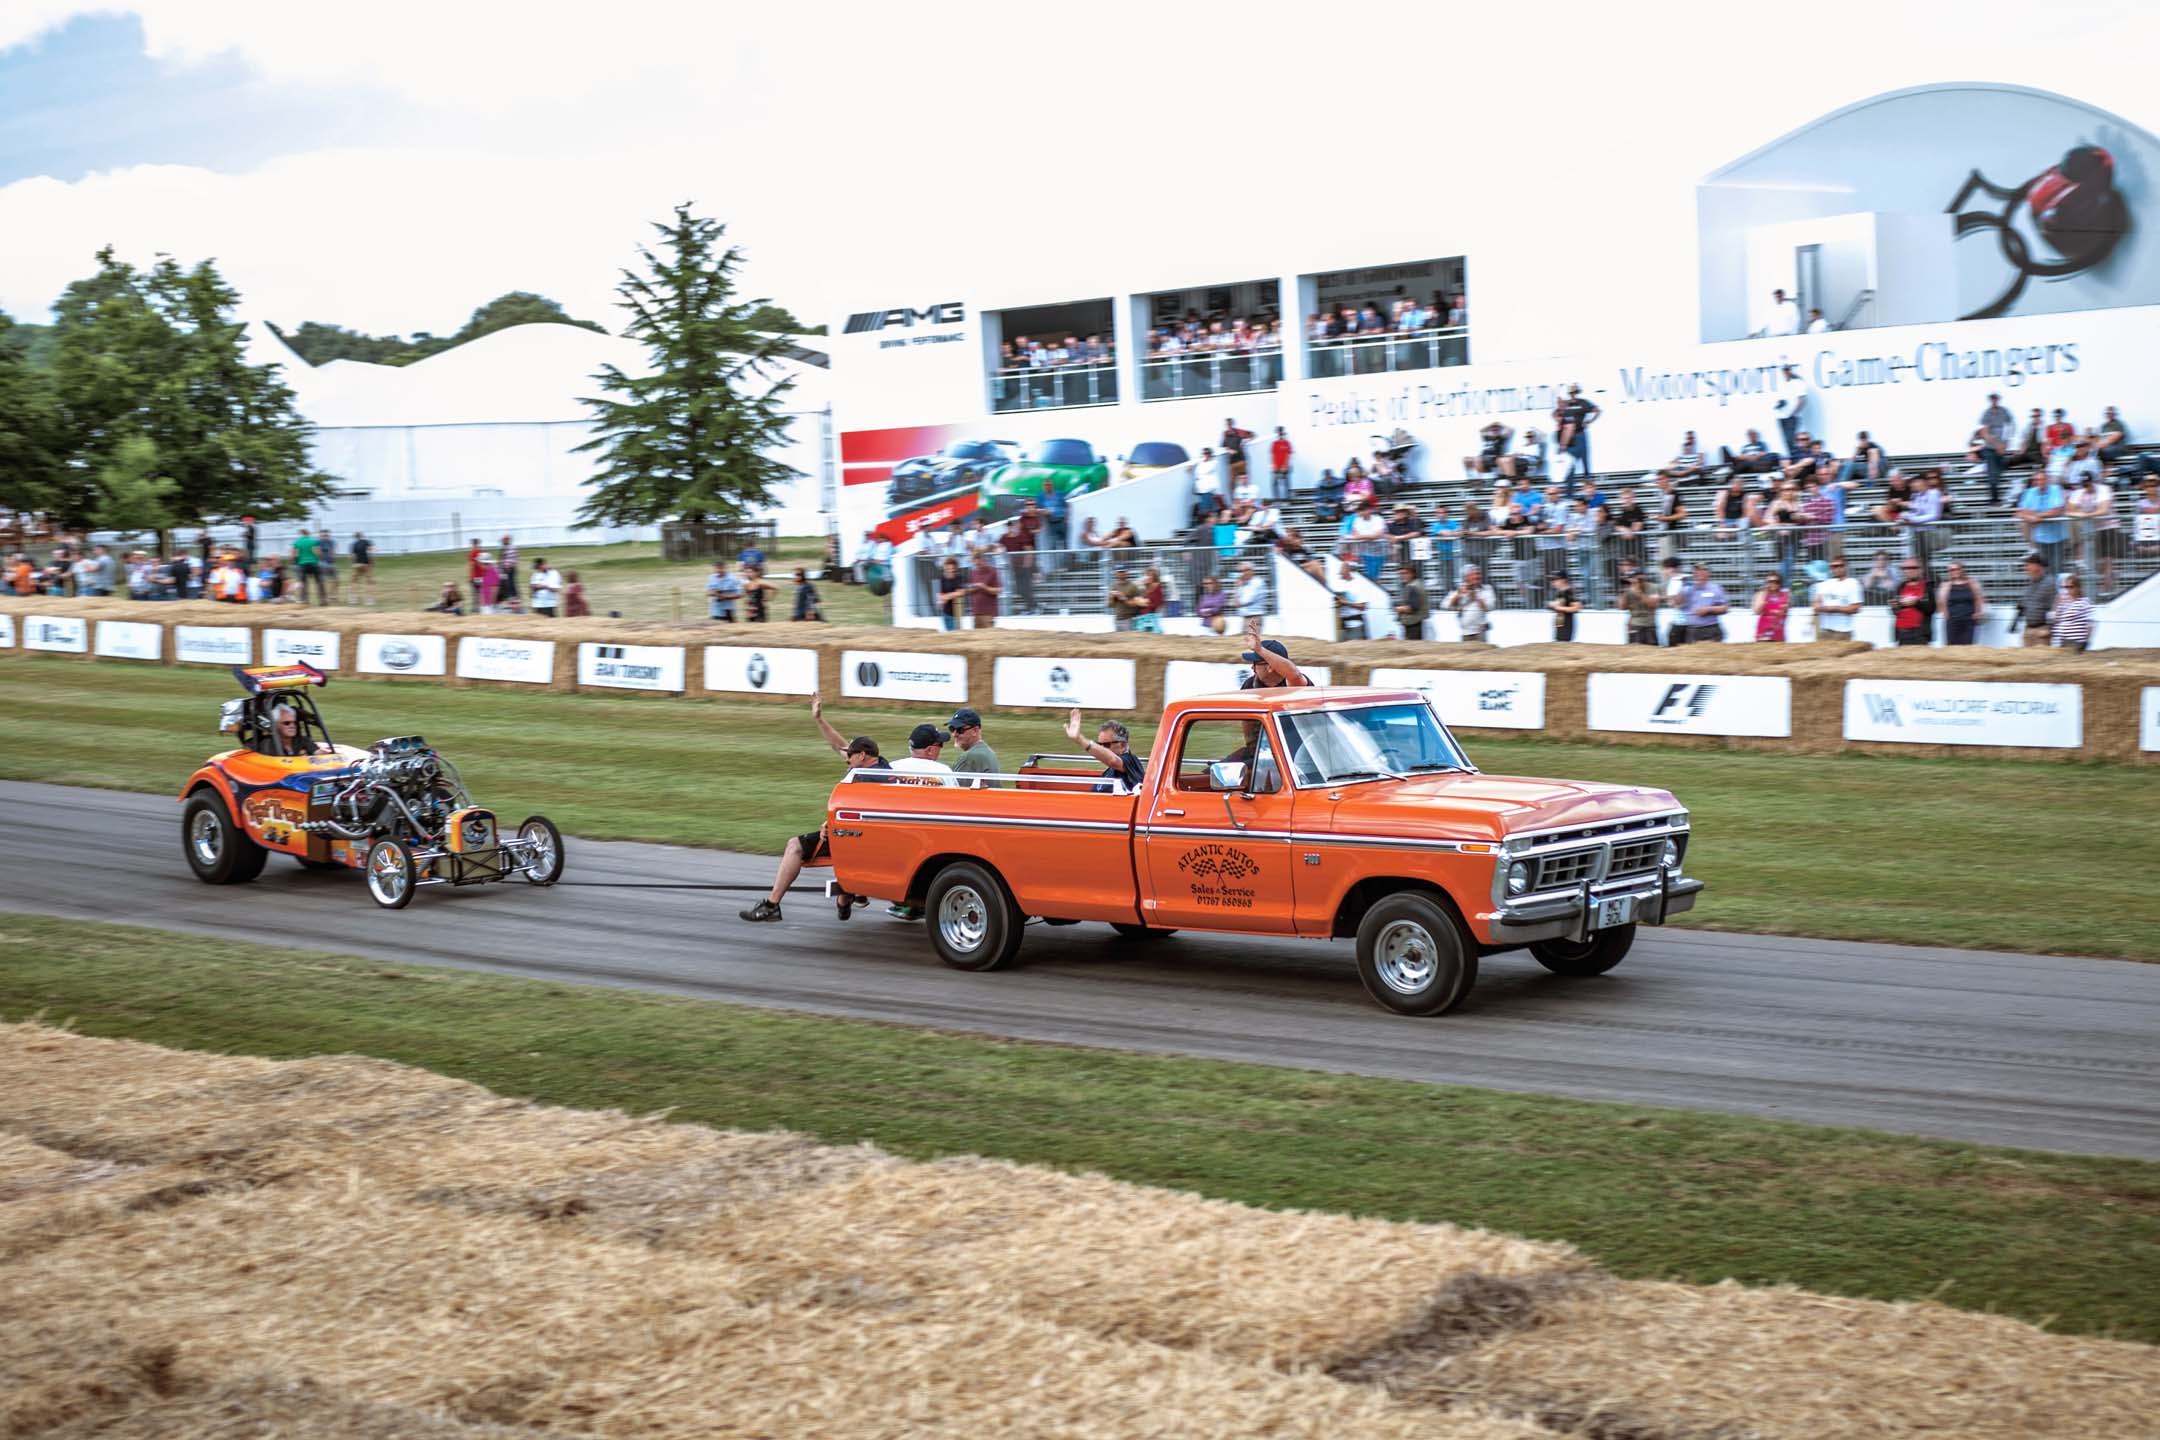 A common sight at any North American historic drag race, this F-150-towed dragster showed up at Goodwood like the proverbial bull in a china shop. Nobody seemed to mind the broken crockery everywhere.